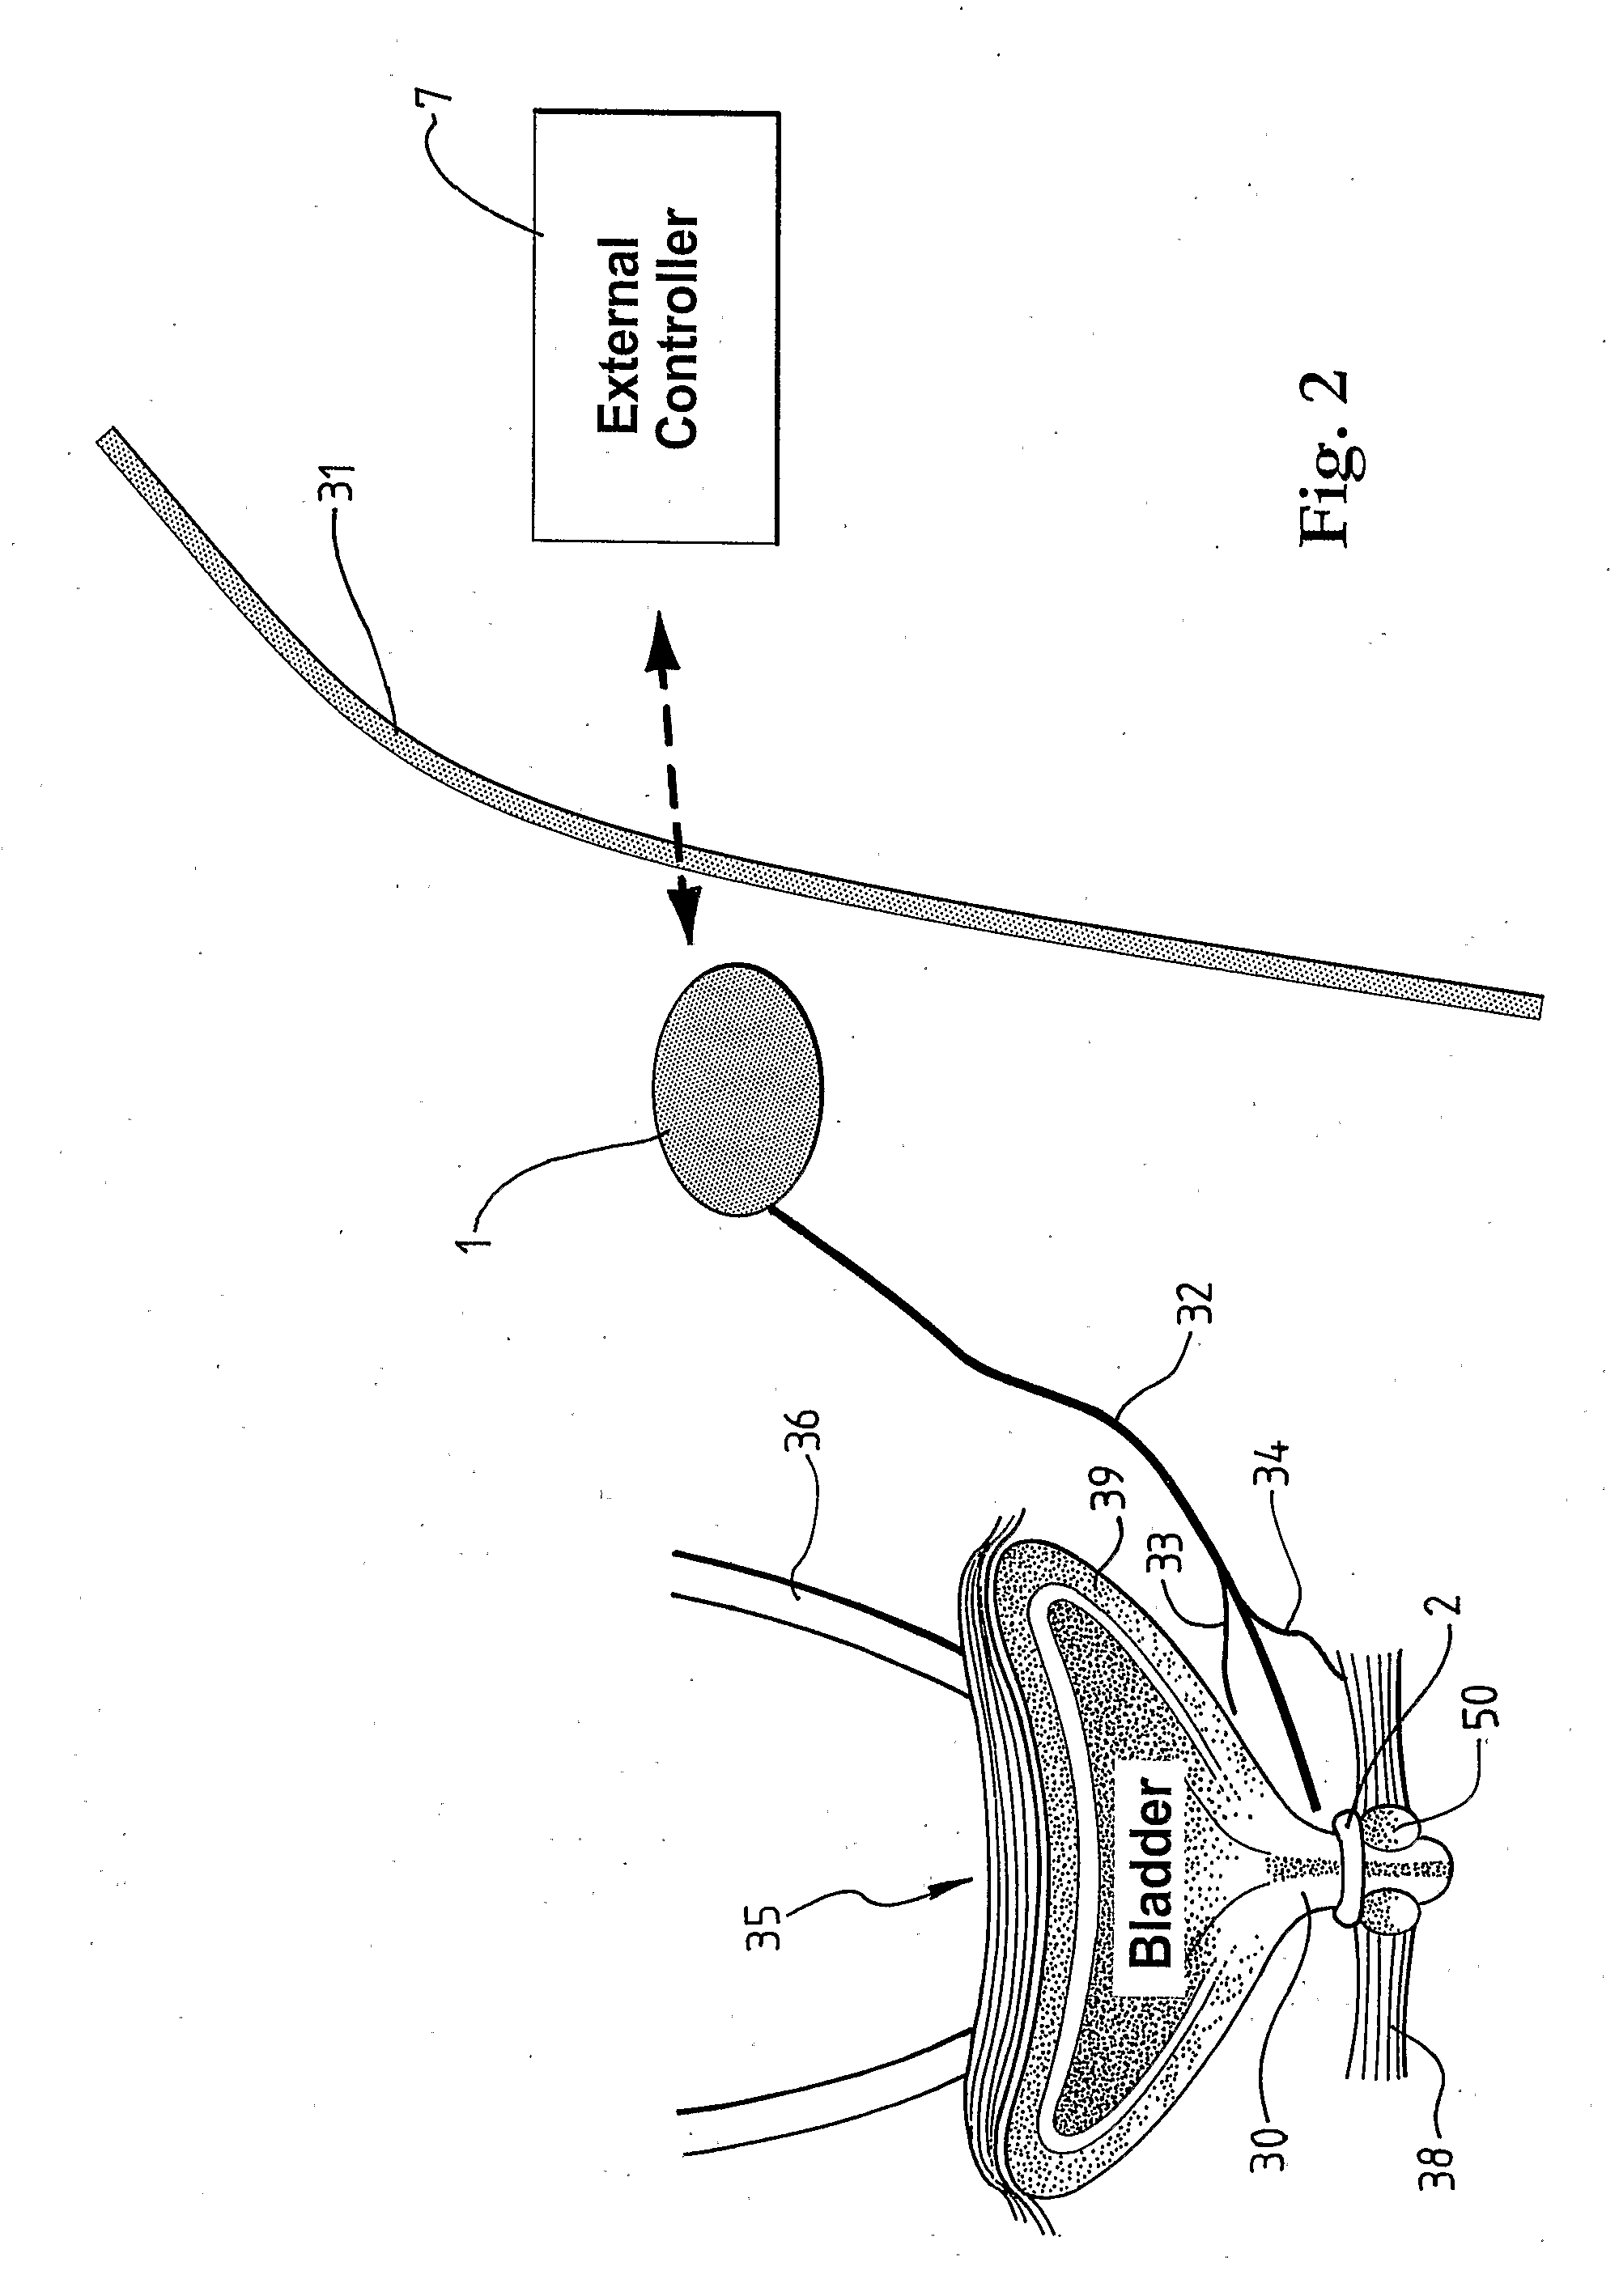 Method and Apparatus for Treating Incontinence